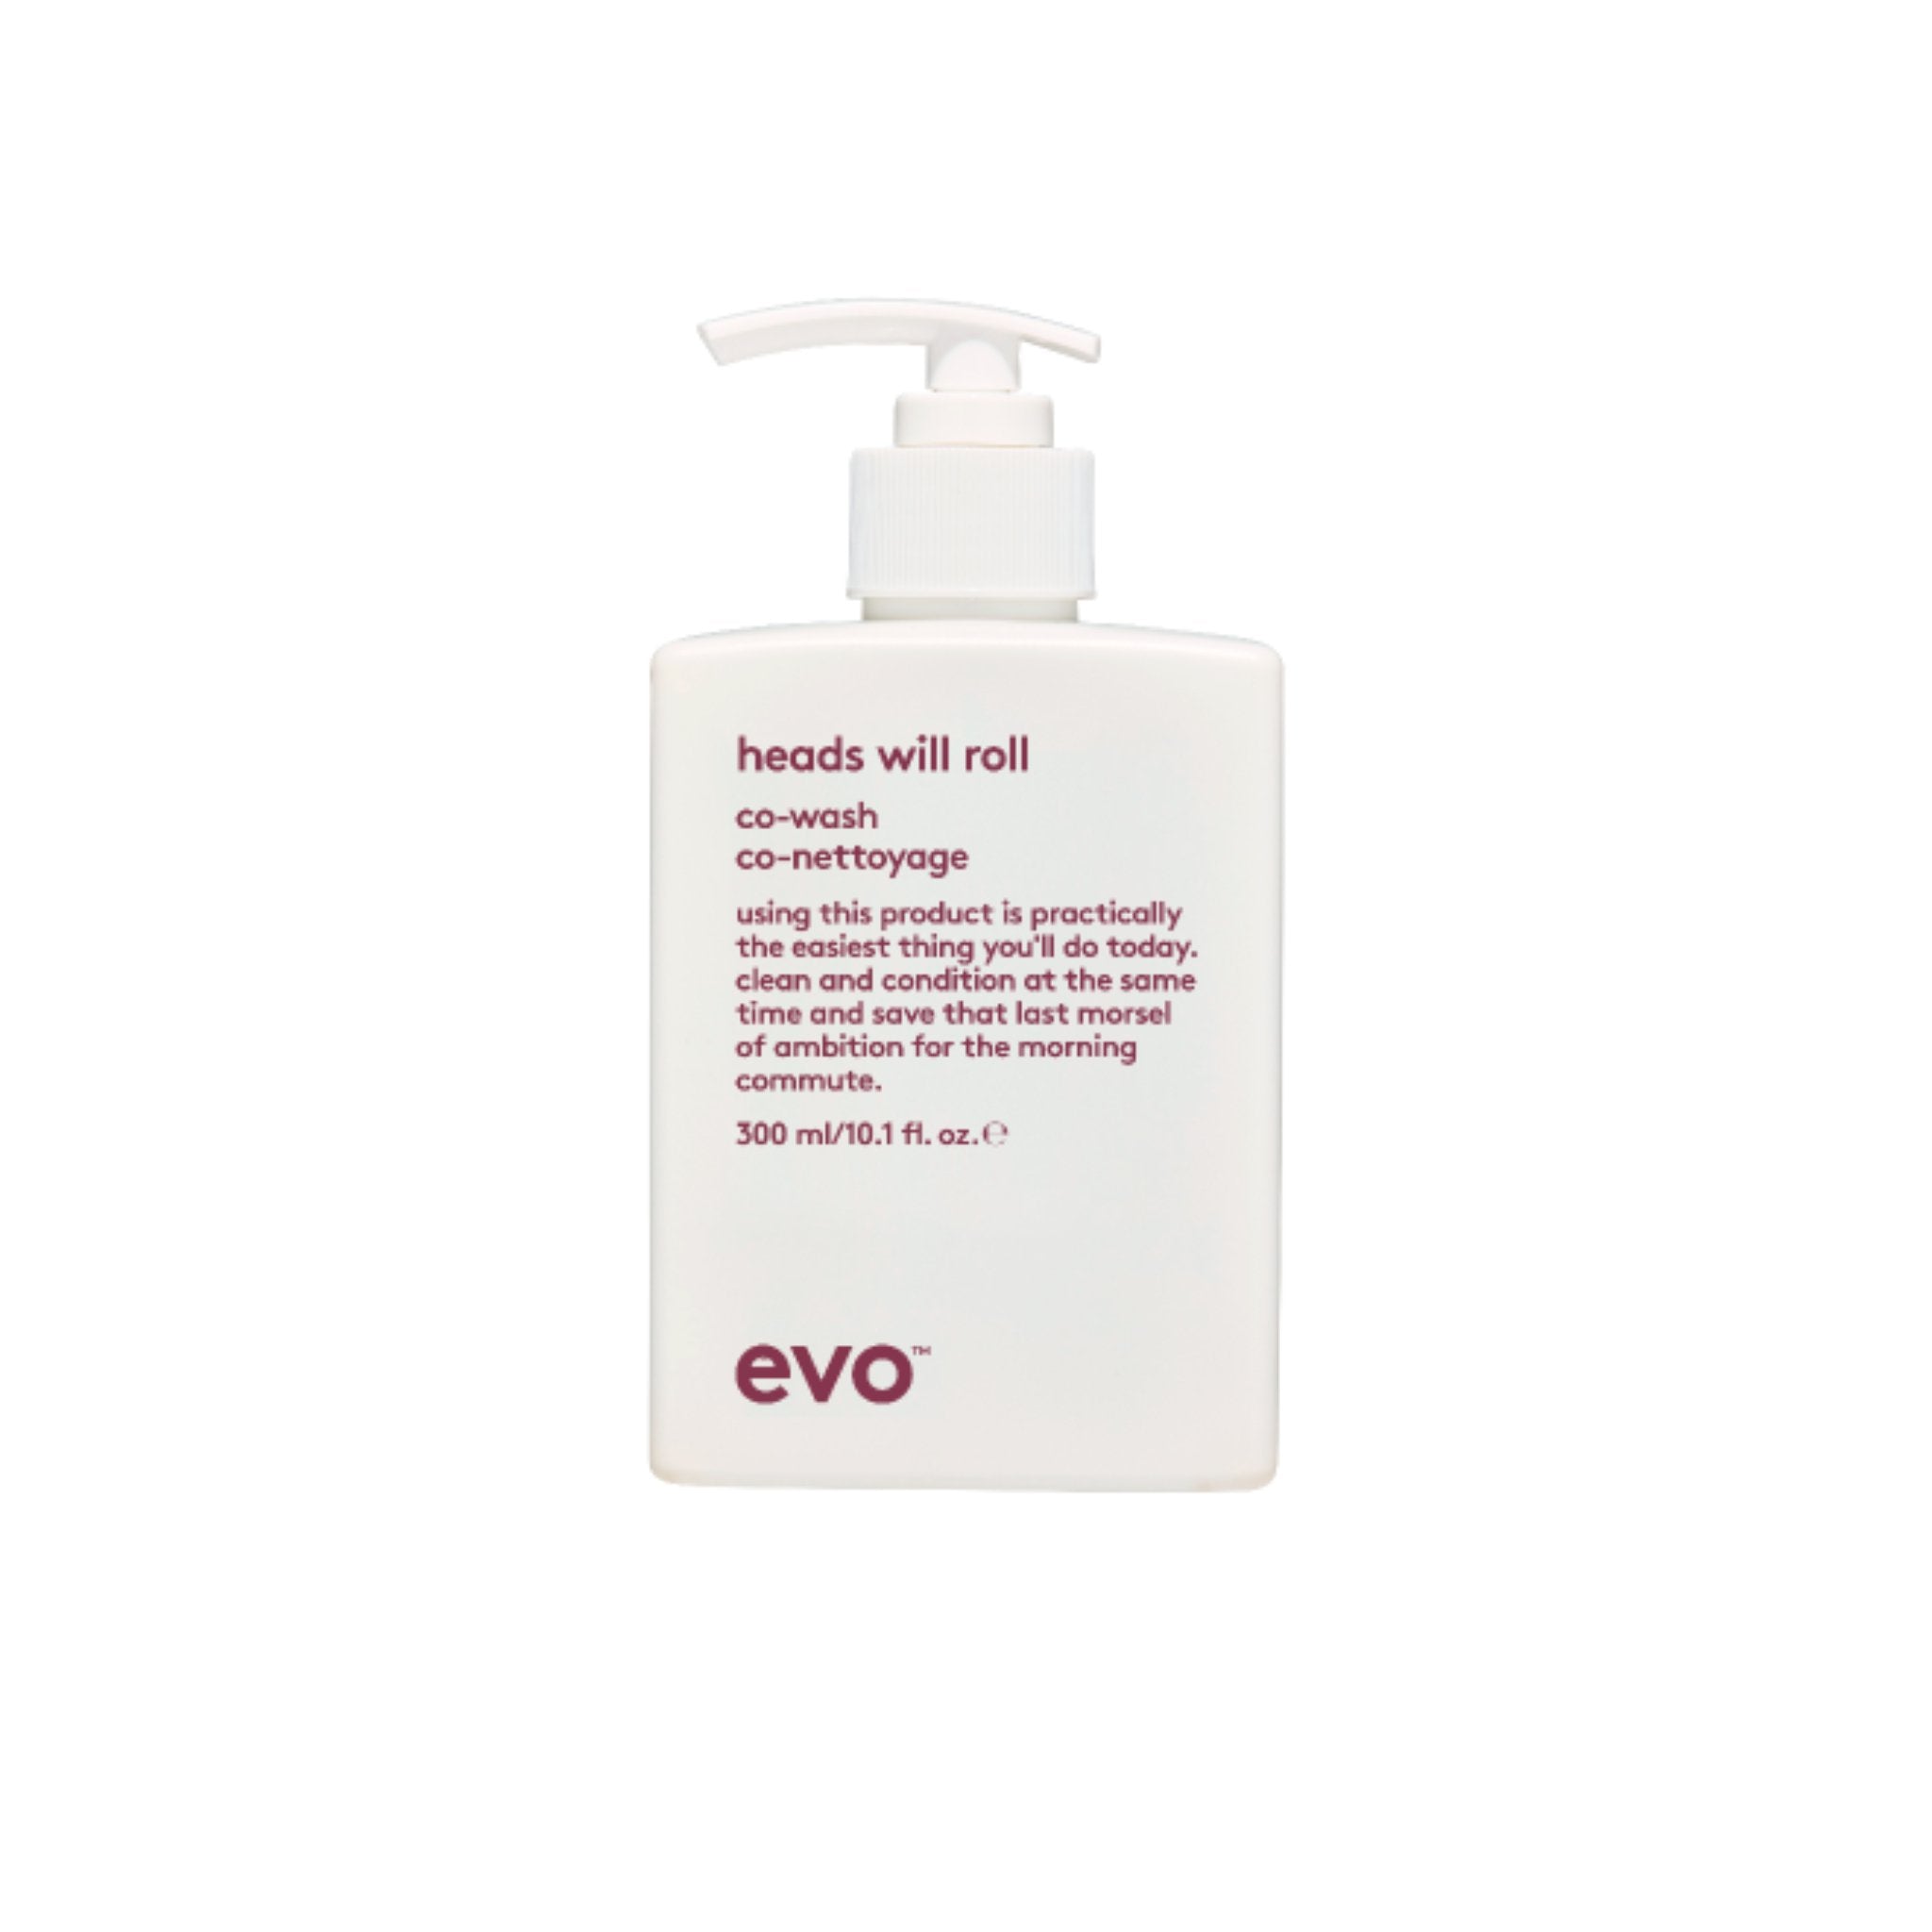 Evo. Heads Will Roll Après-Shampoing Co-Nettoyage - 300 ml - Concept C. Shop